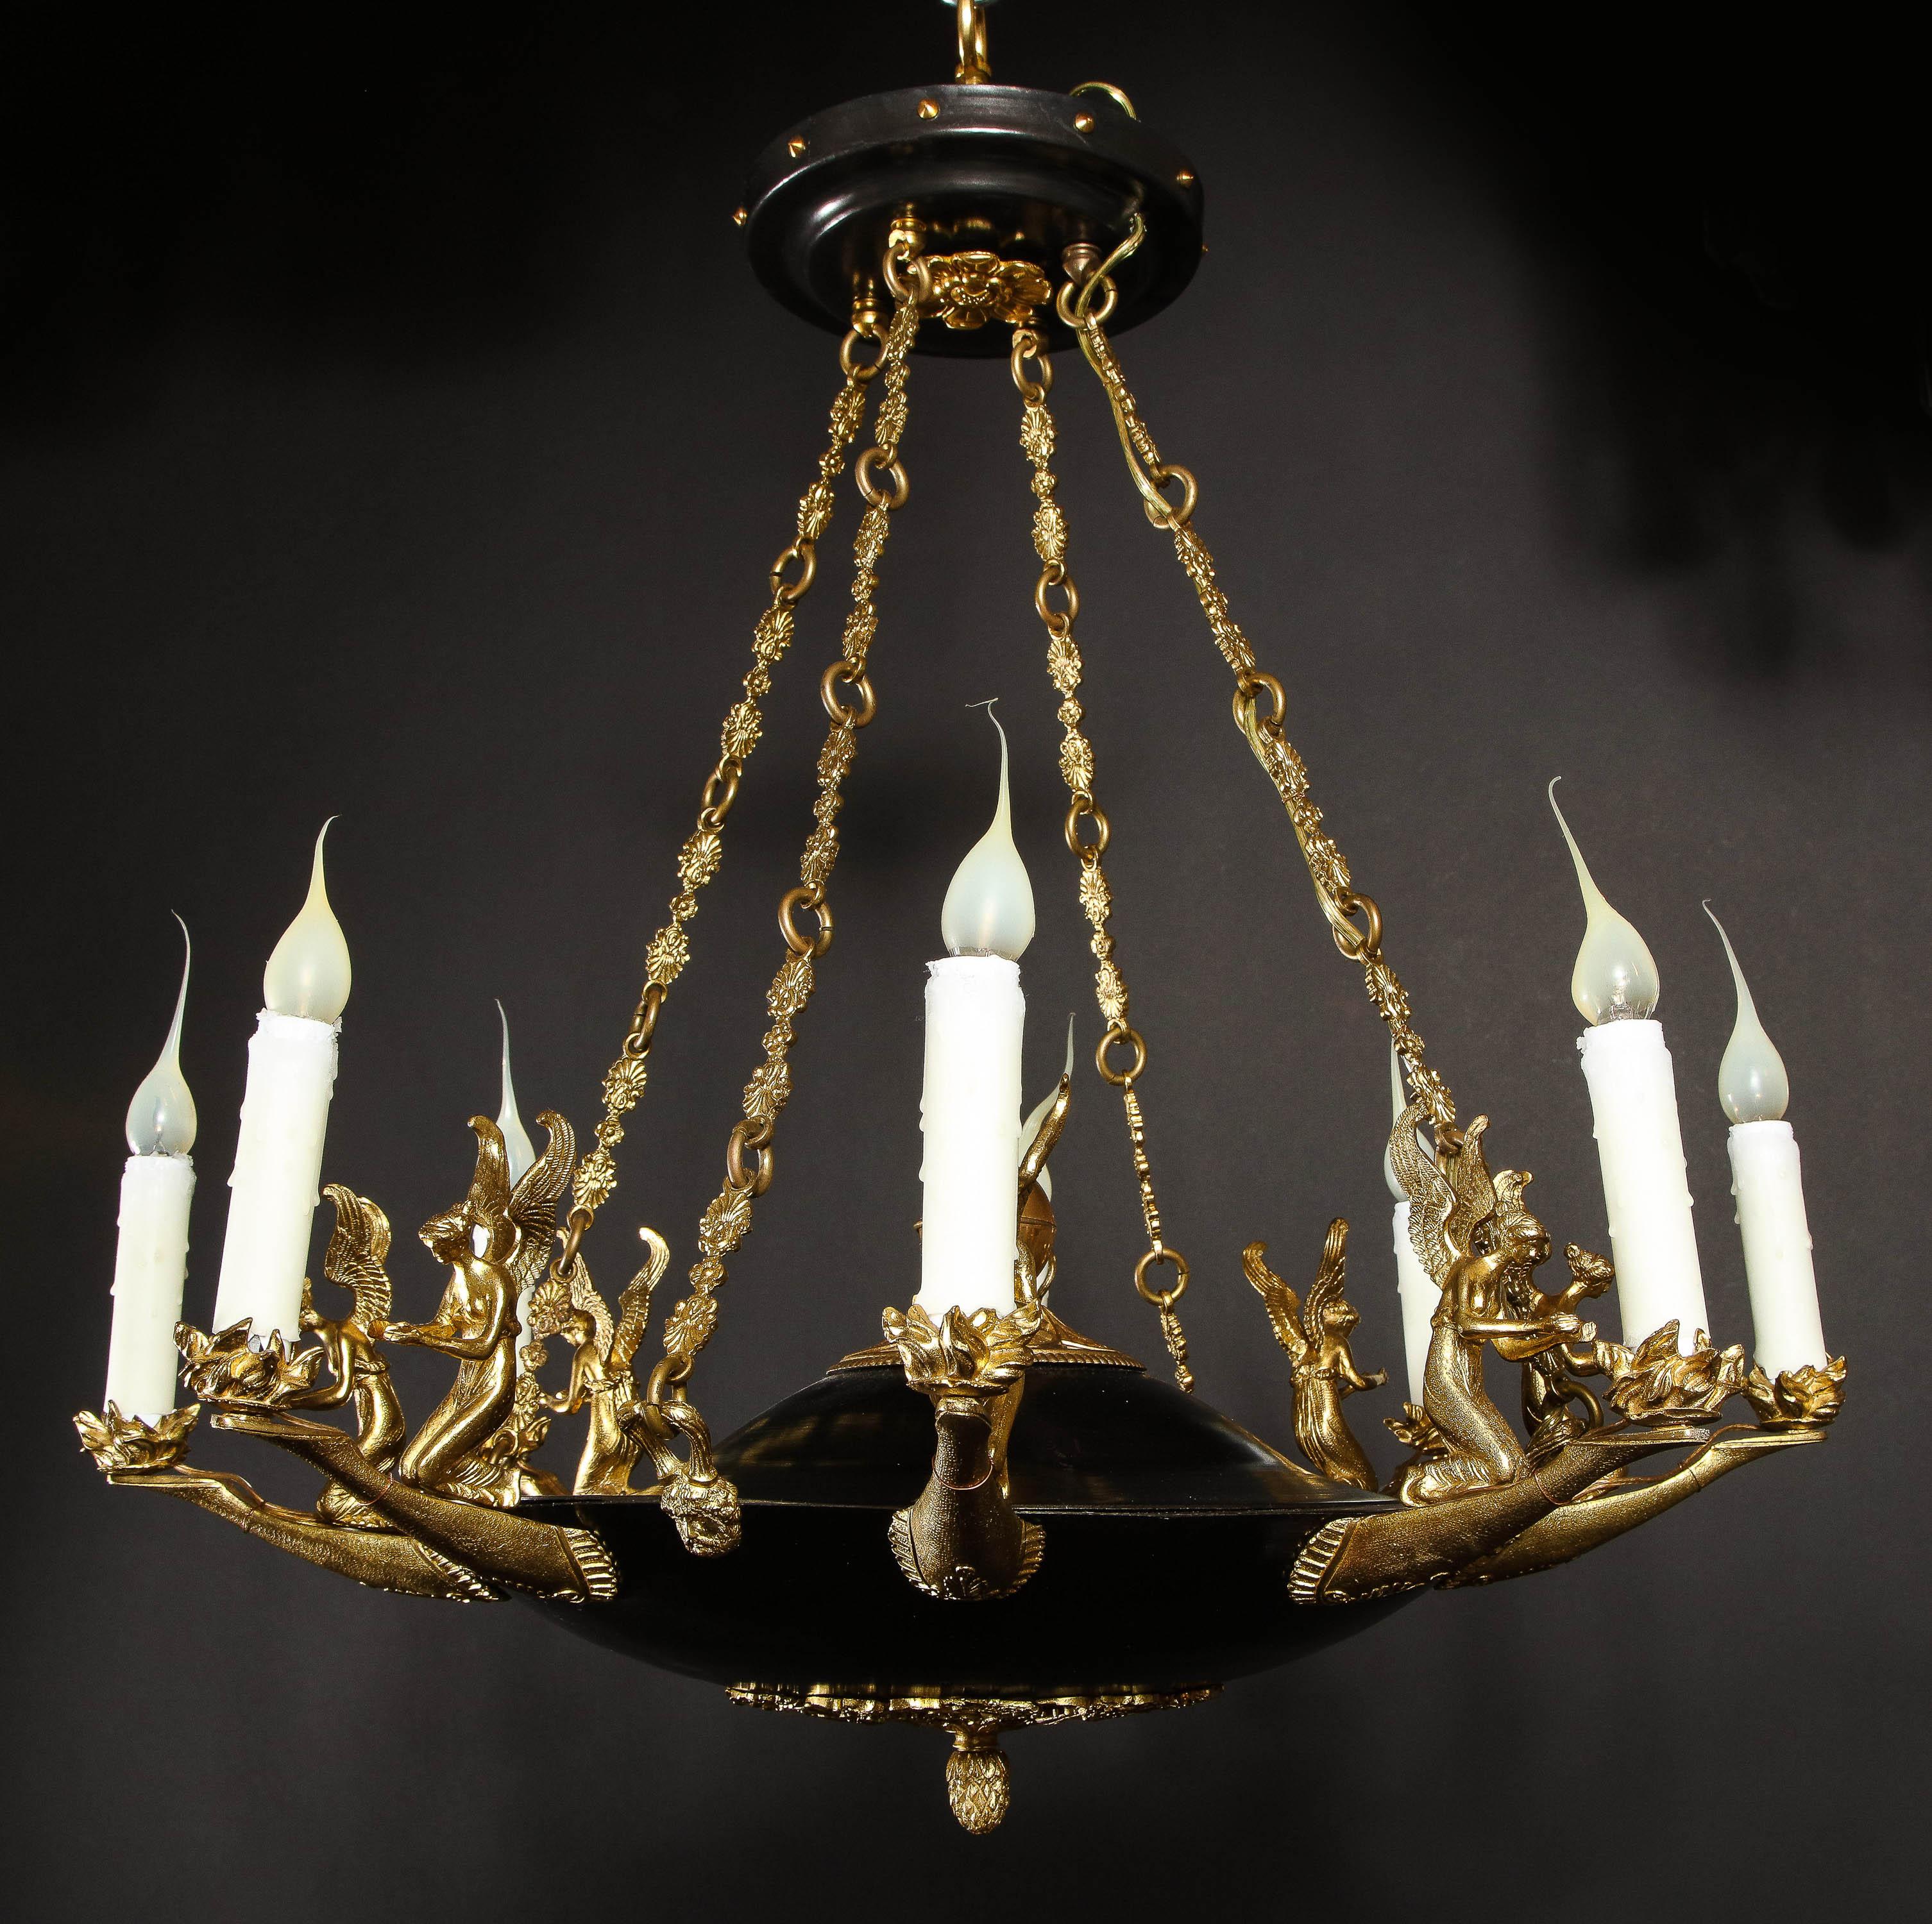 Pair of Antique French Empire Style Figural Gilt & Patina Bronze Chandeliers In Good Condition For Sale In New York, NY